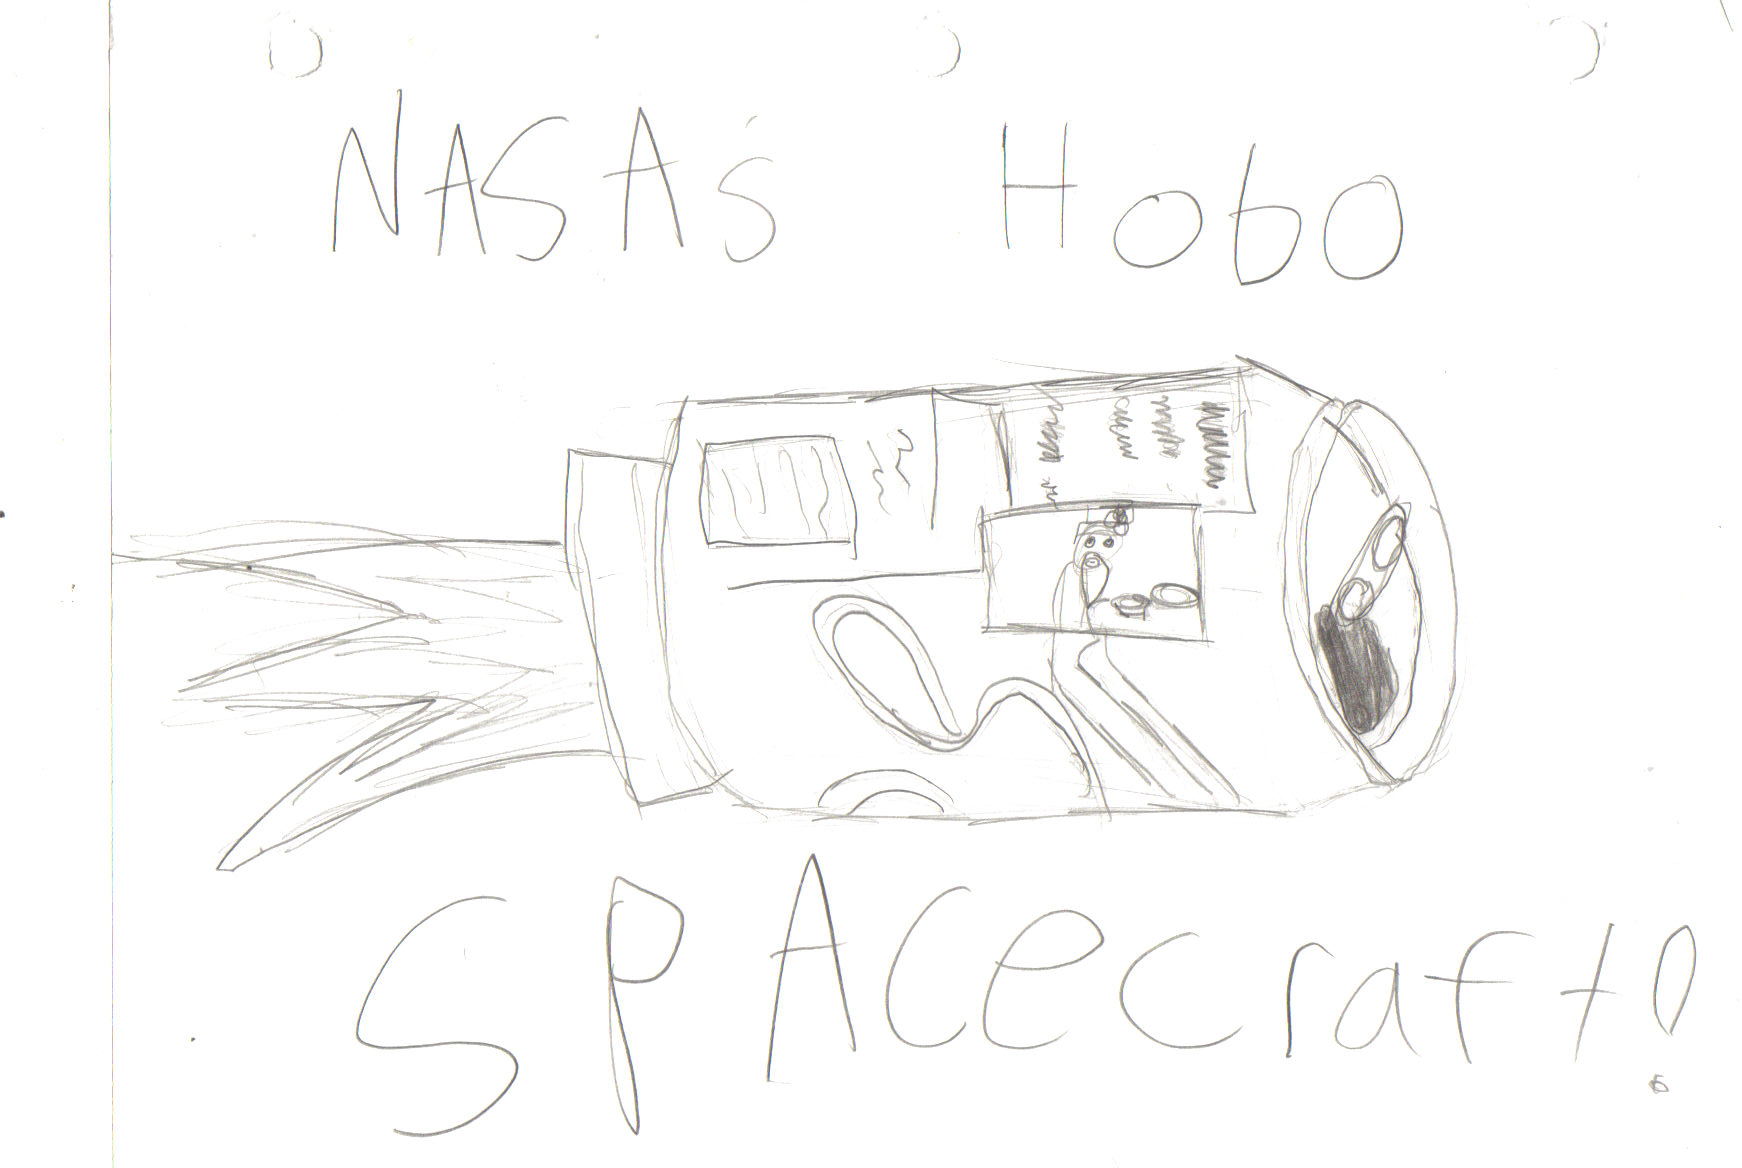 Hobo spacecraft by Hobz_the_destroyer